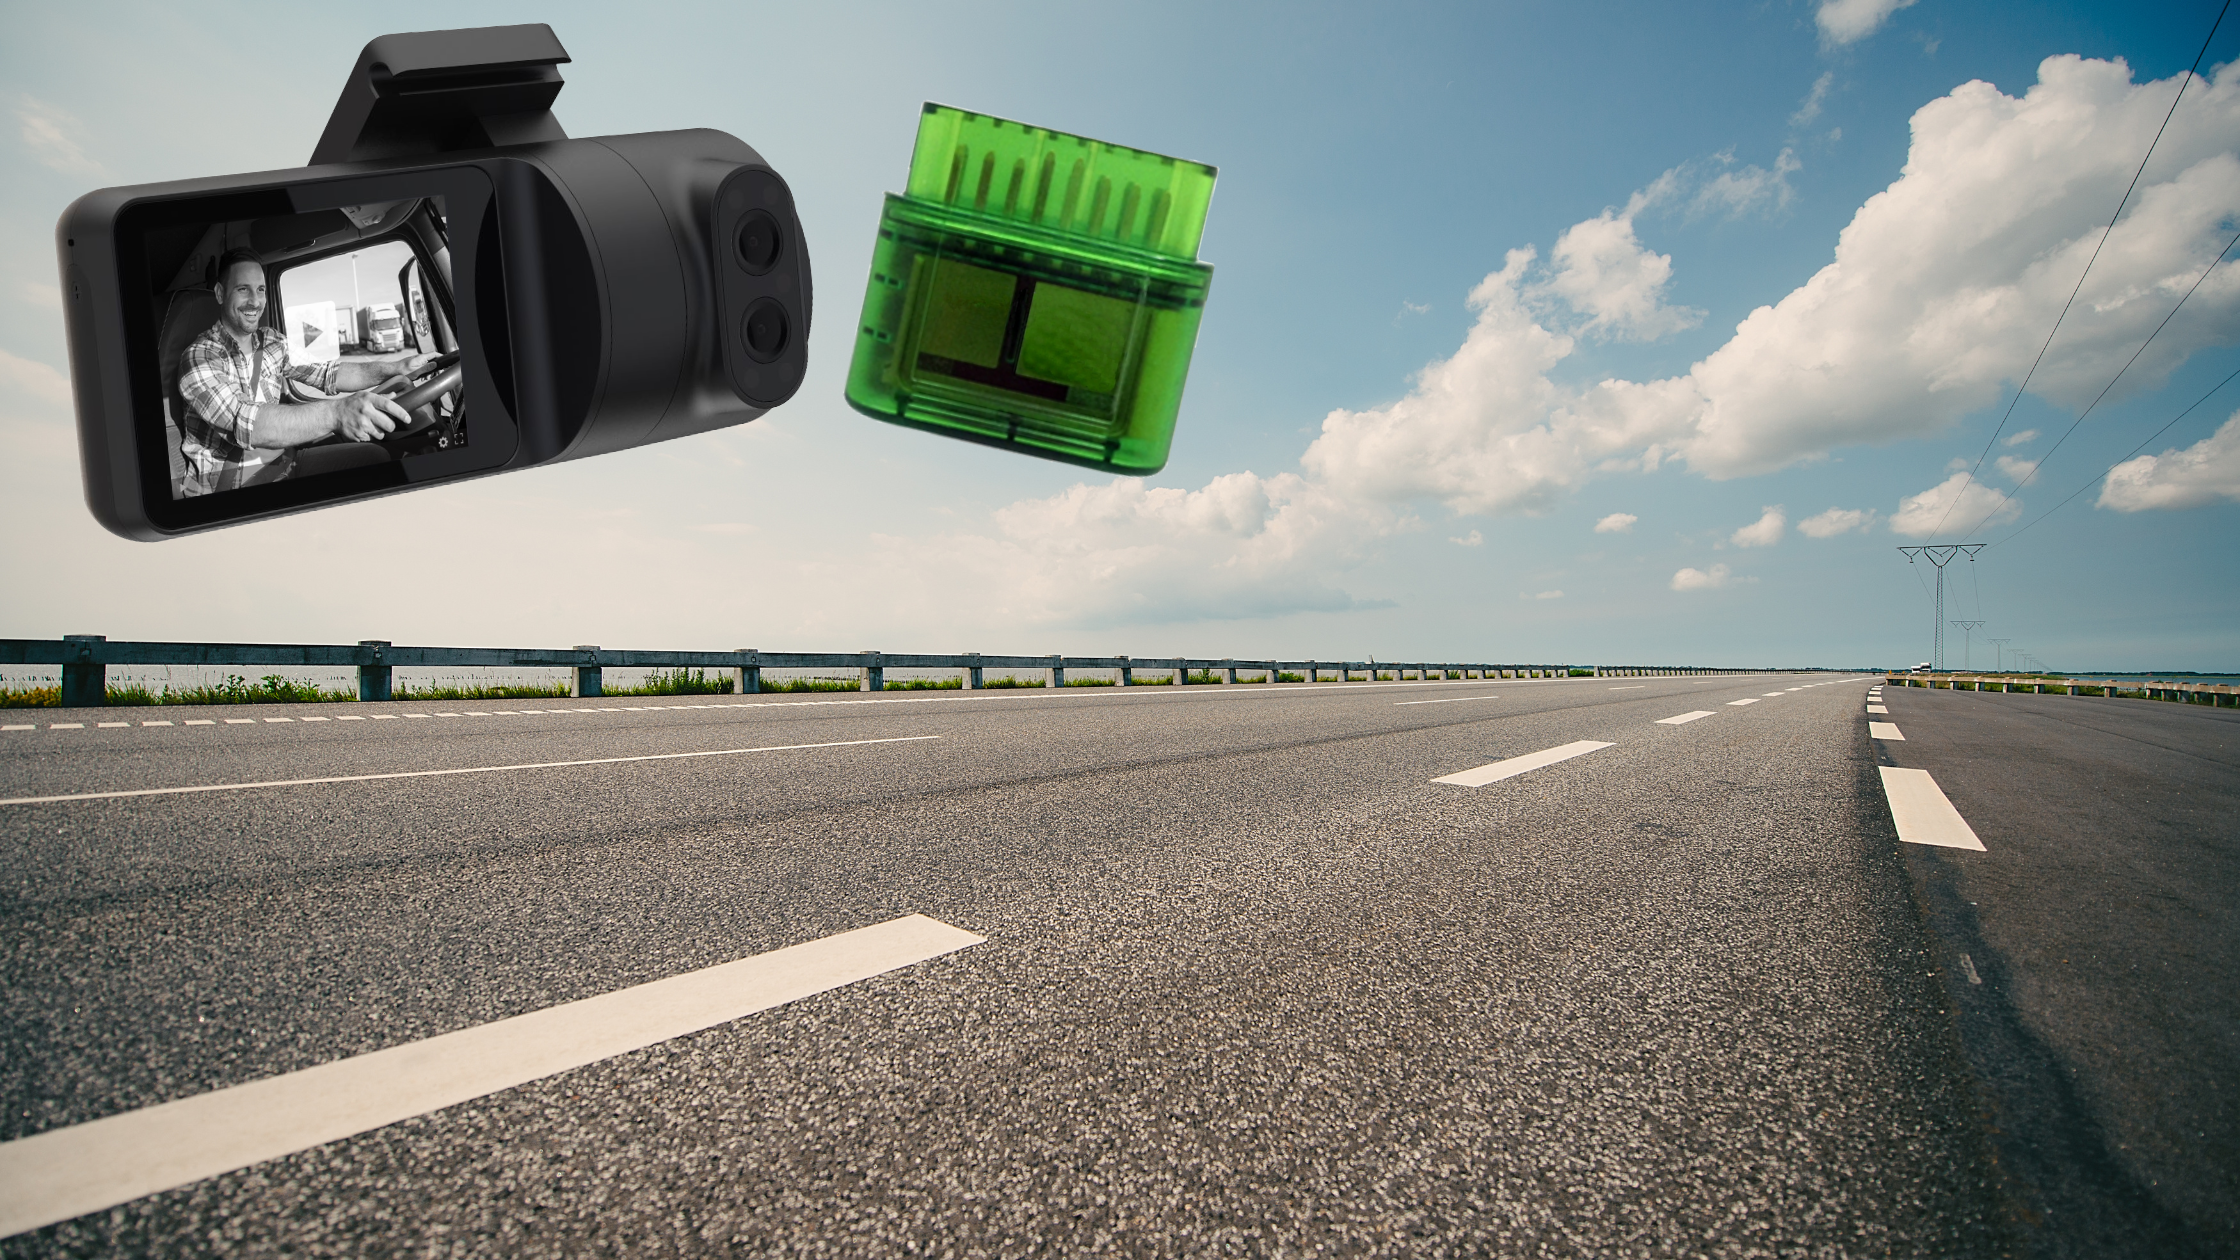 National Car Insurance Day: Drive Smart, Save Big with GPS Tracking Devices and Dash Cams